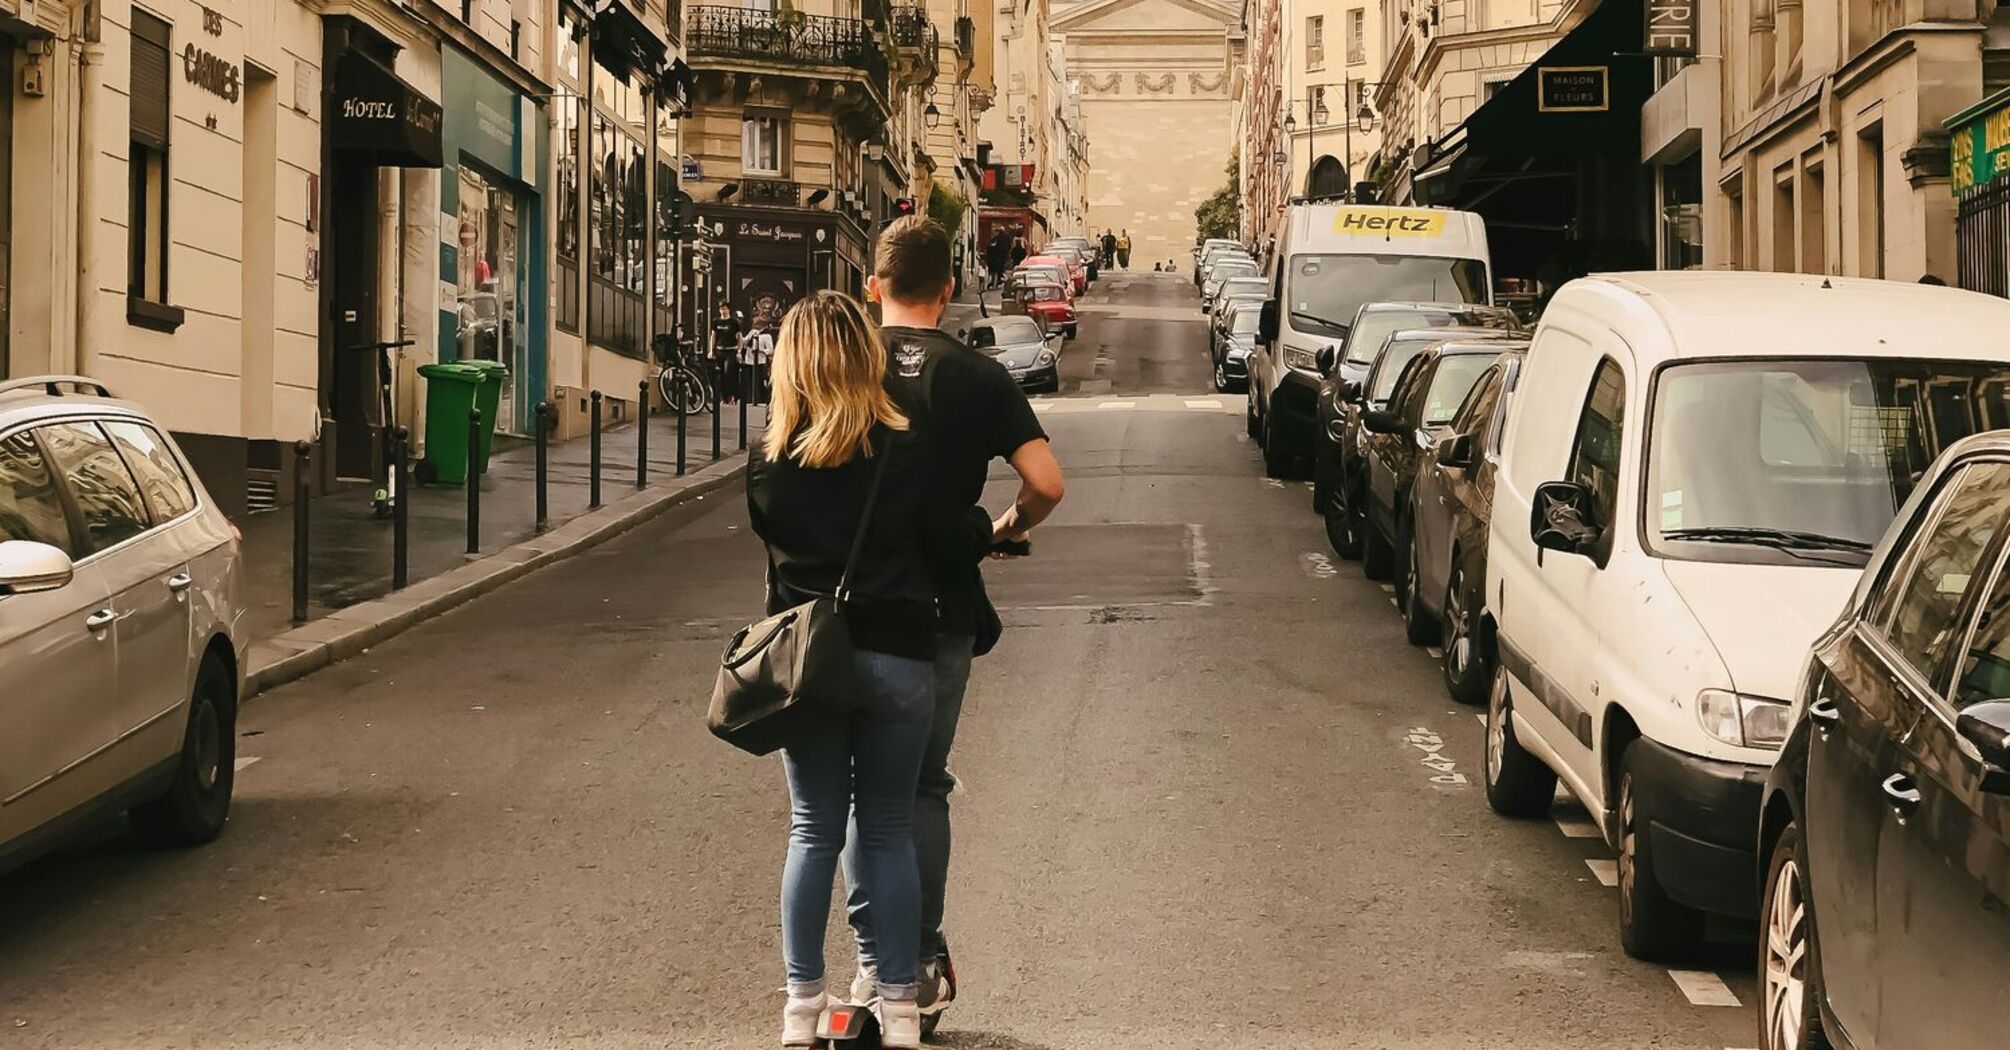 Man and woman riding kick scooter in Paris